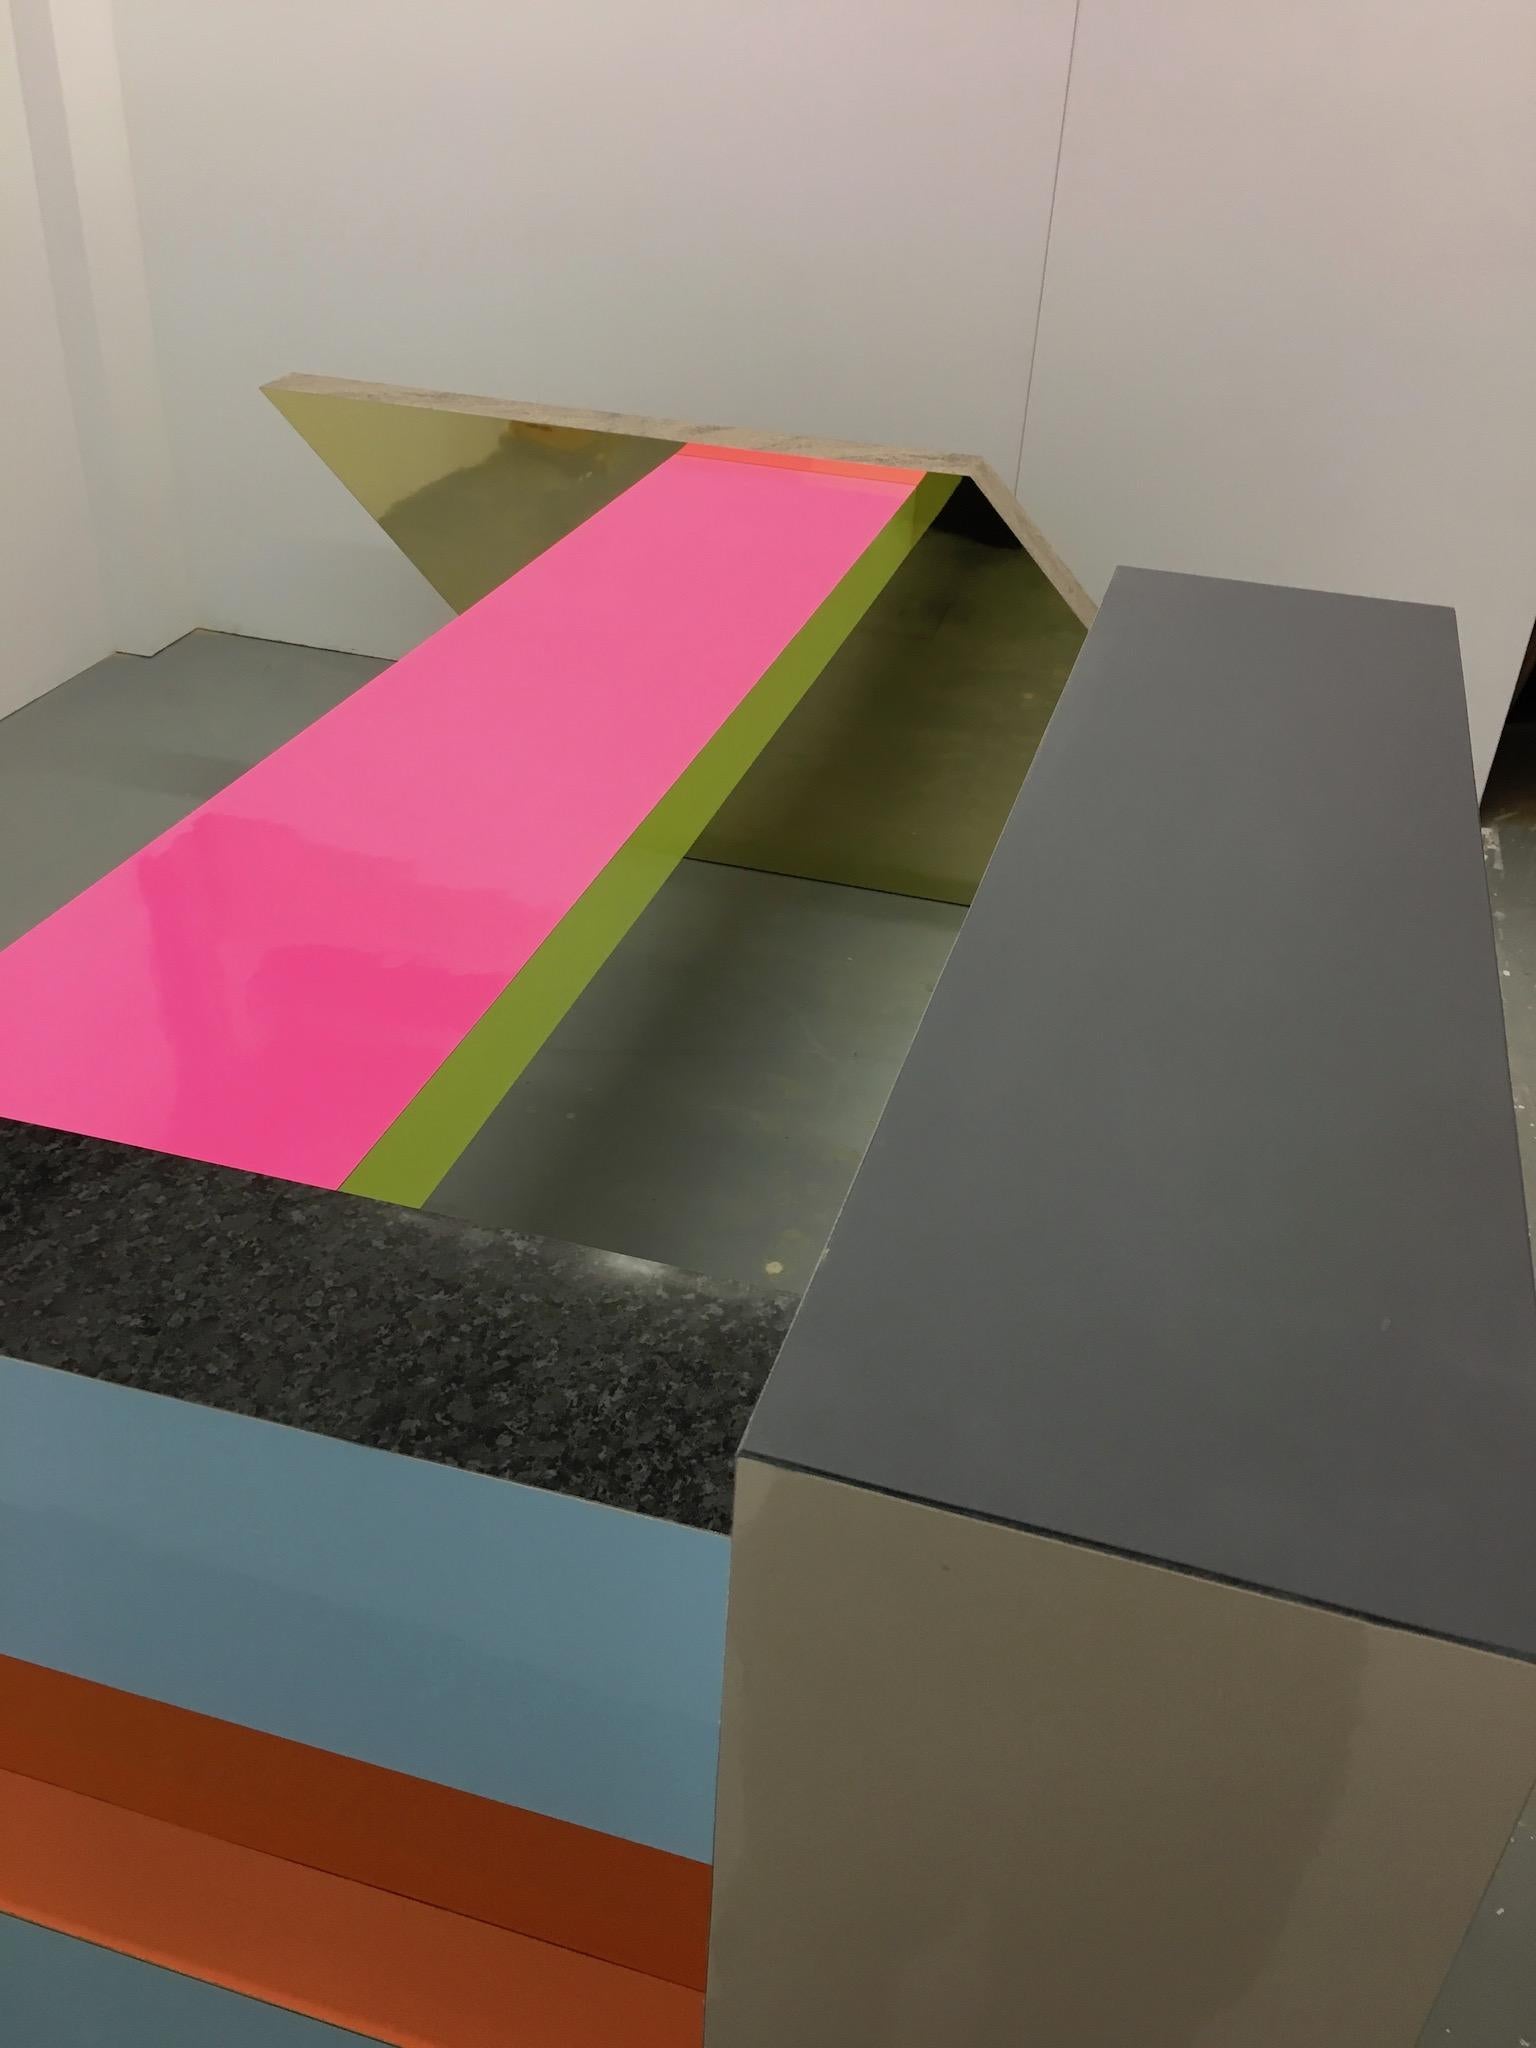 British Hot Desk 2, Berlin, by Russell Bamber, 2018, Colored Laminate on Ply Structure For Sale